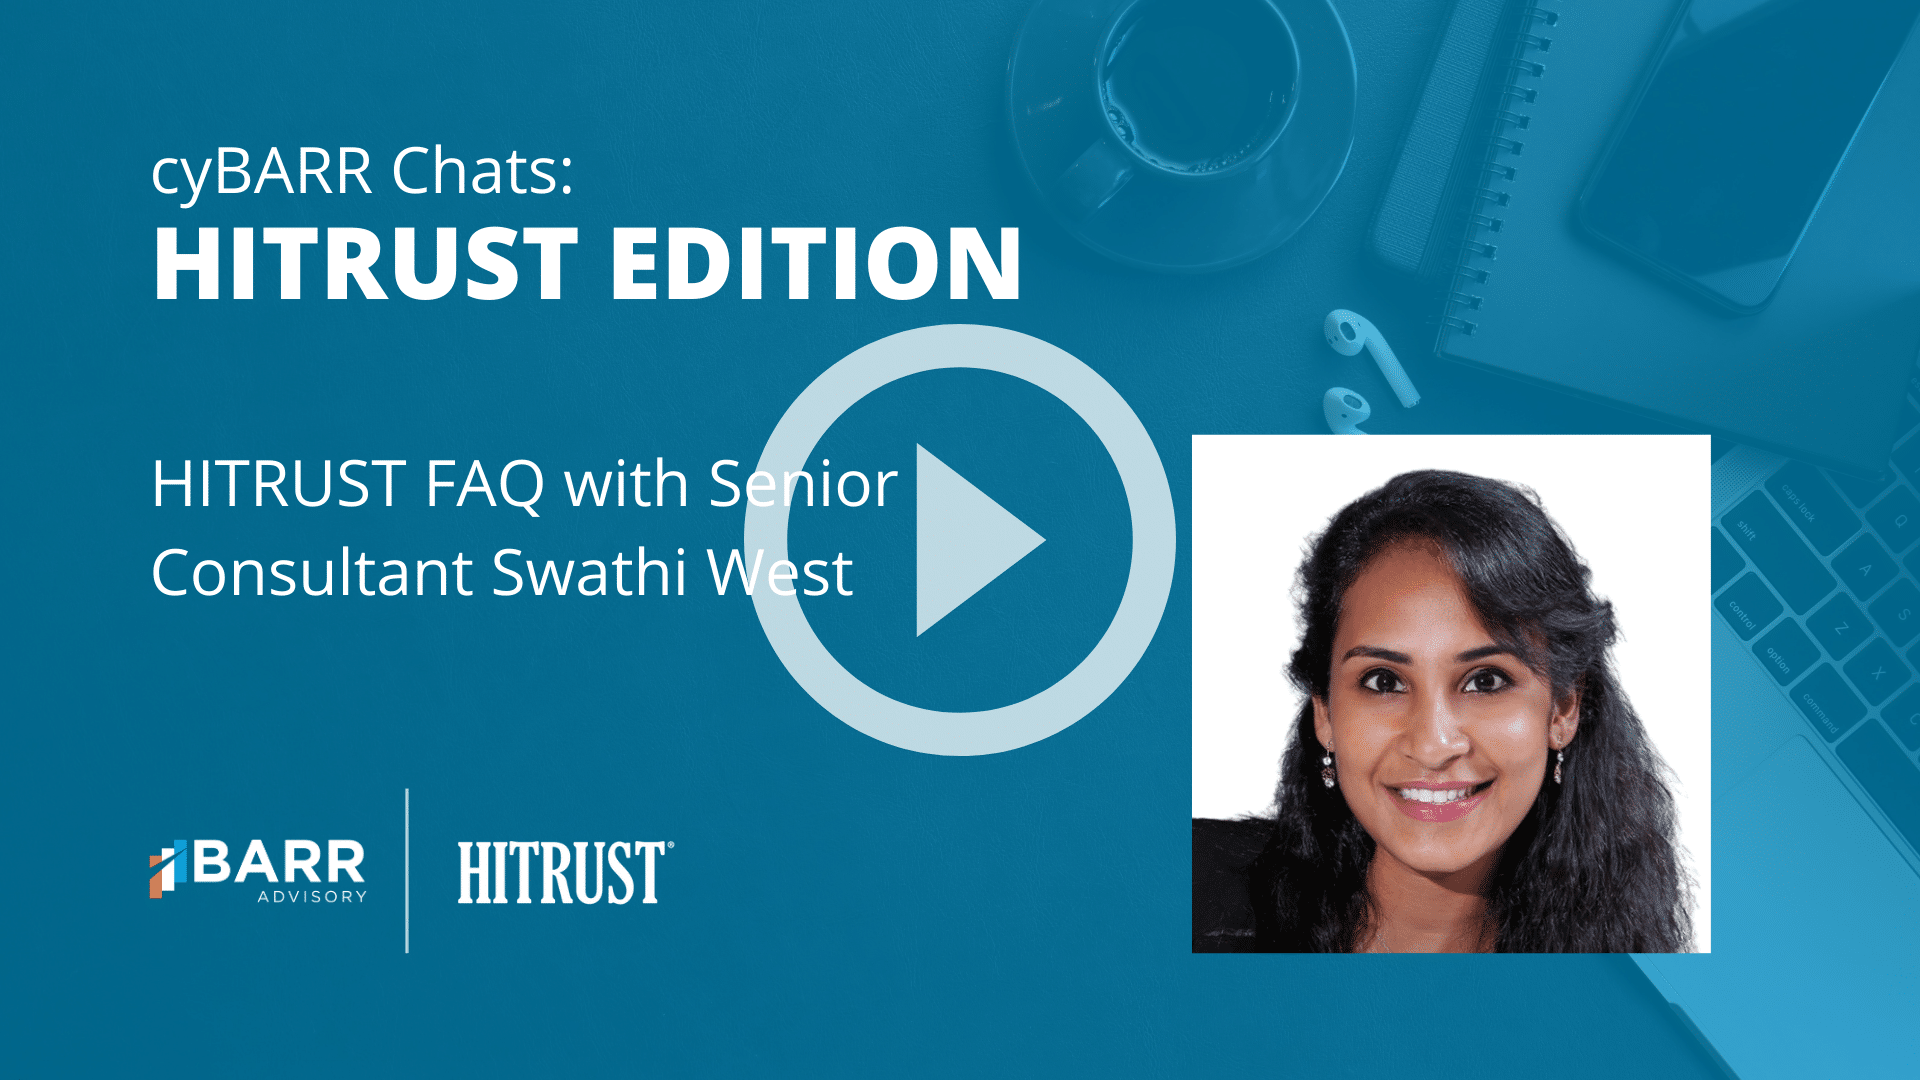 cyBARR Chats HITRUST Edition: FAQ with Senior Consultant Swathi West